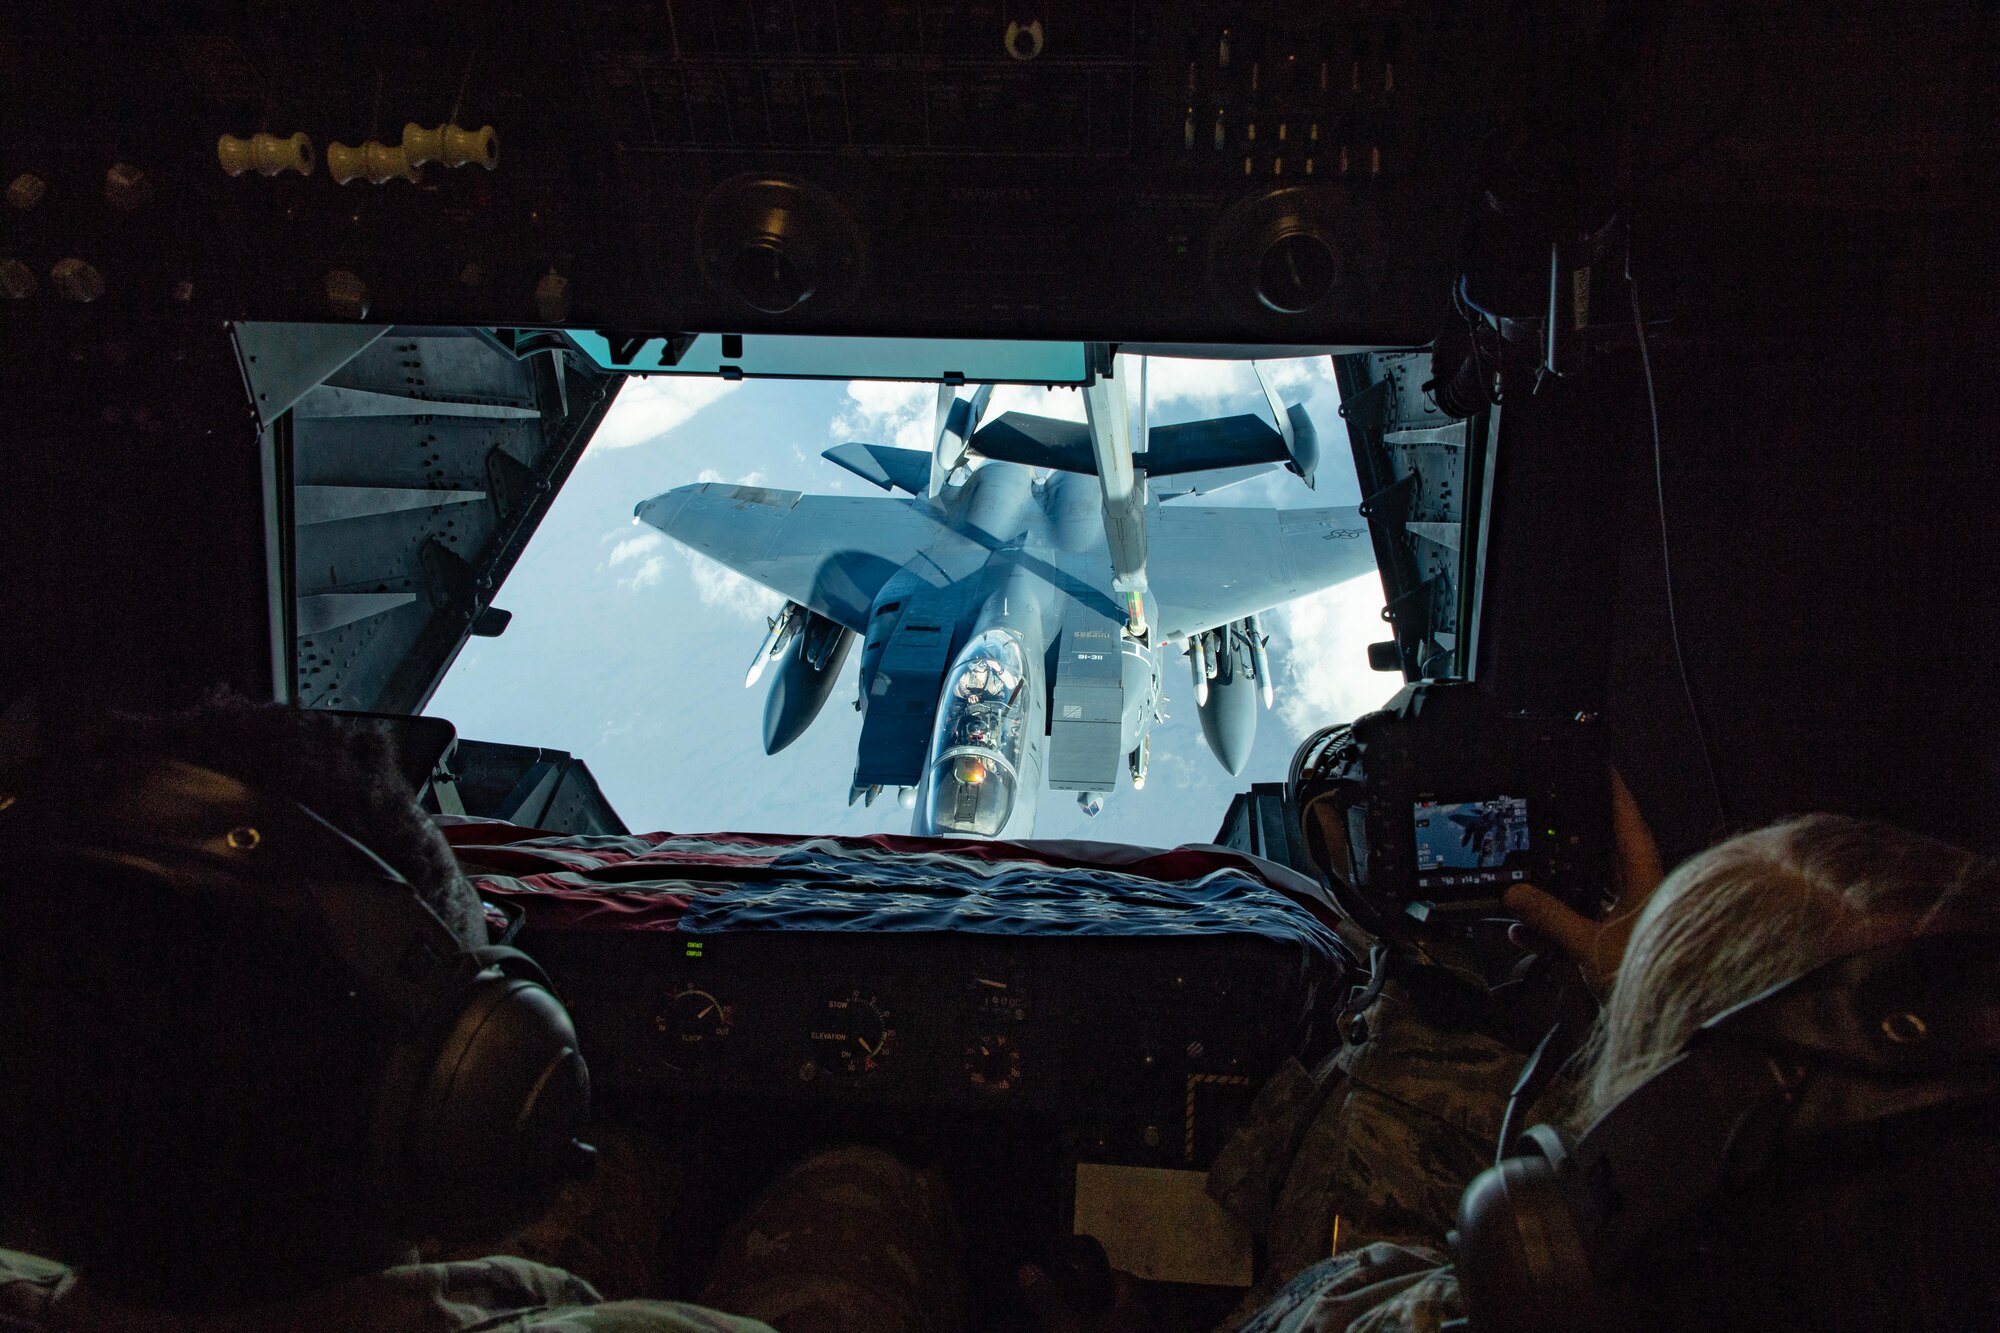 A U.S. Air Force F-15E Strike Eagle assigned to the 48th Fighter Wing, Royal Air Force Lakenheath, prepares to receive fuel from a U.S. Air Force KC-10 Extender from the 380th Air Expeditionary Wing over Southwest Asia, April 21, 2018. (U.S. Air National Guard photo by Tech. Sgt. Nieko Carzis)